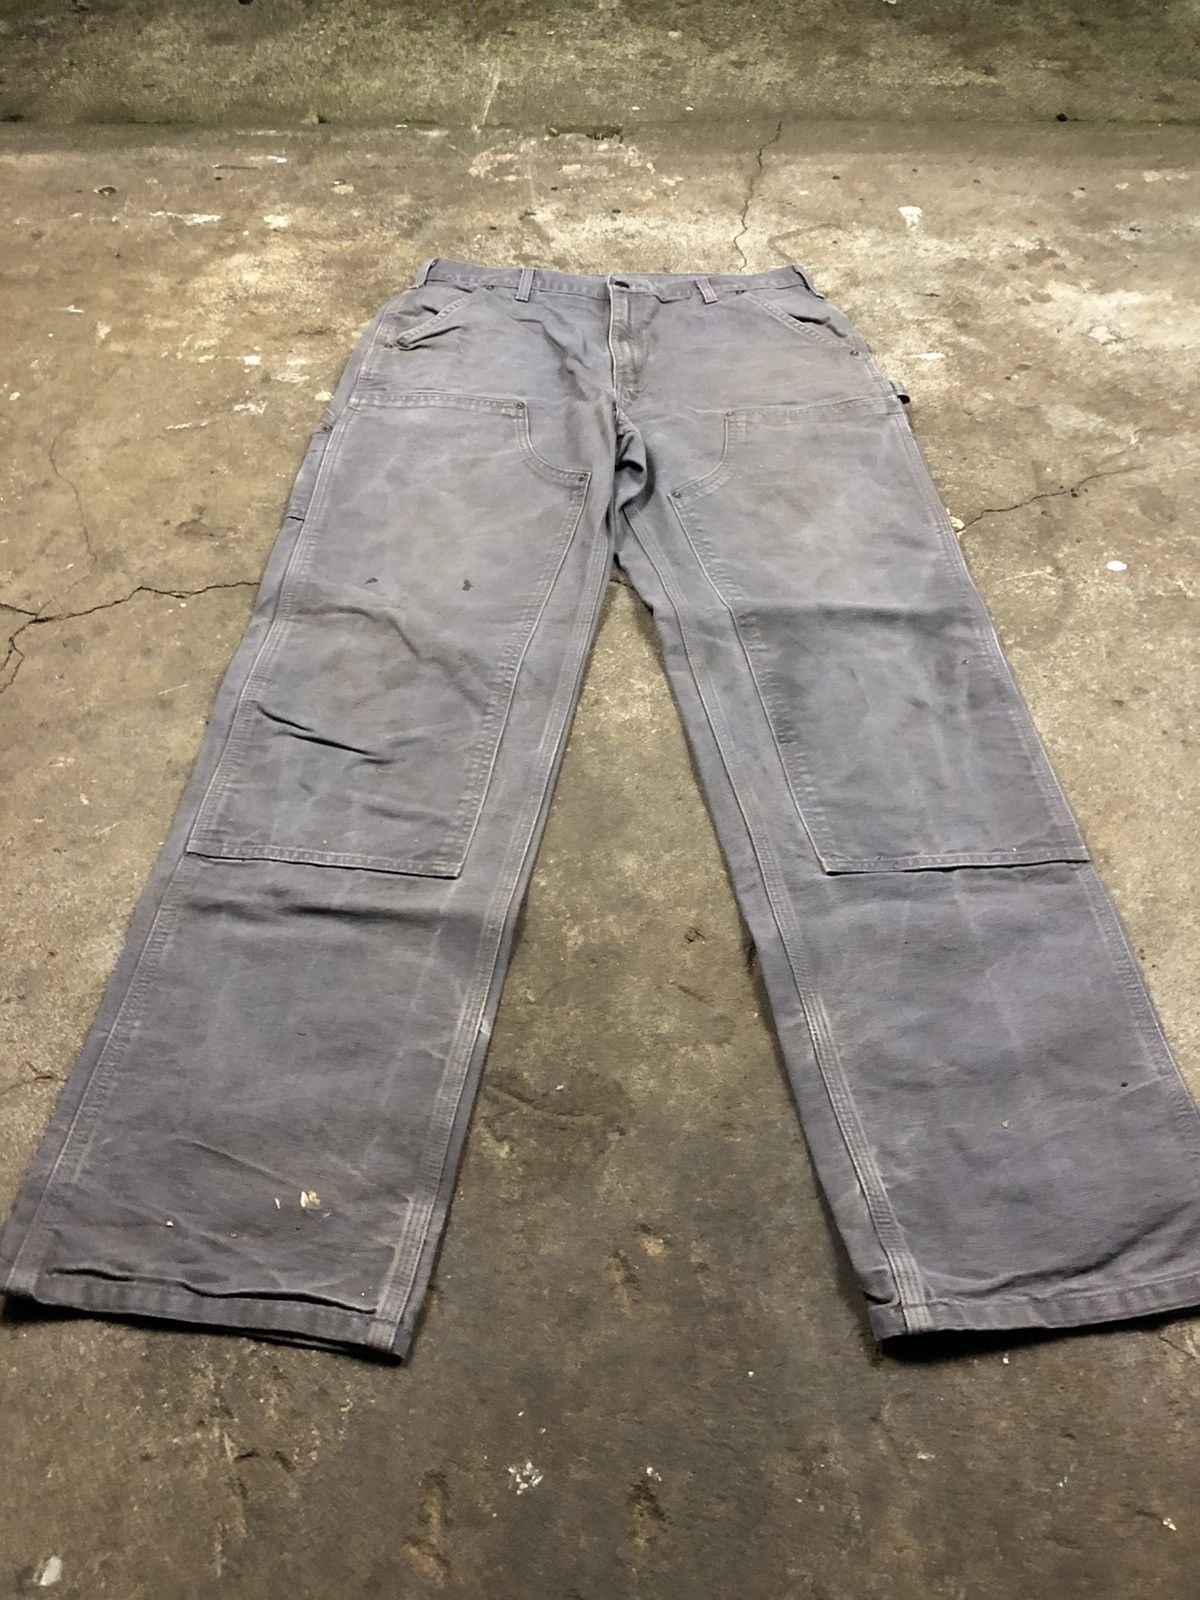 Vintage Carhartt Double Knee Work Pants 34x36 Faded Distressed Size US 34 / EU 50 - 6 Thumbnail